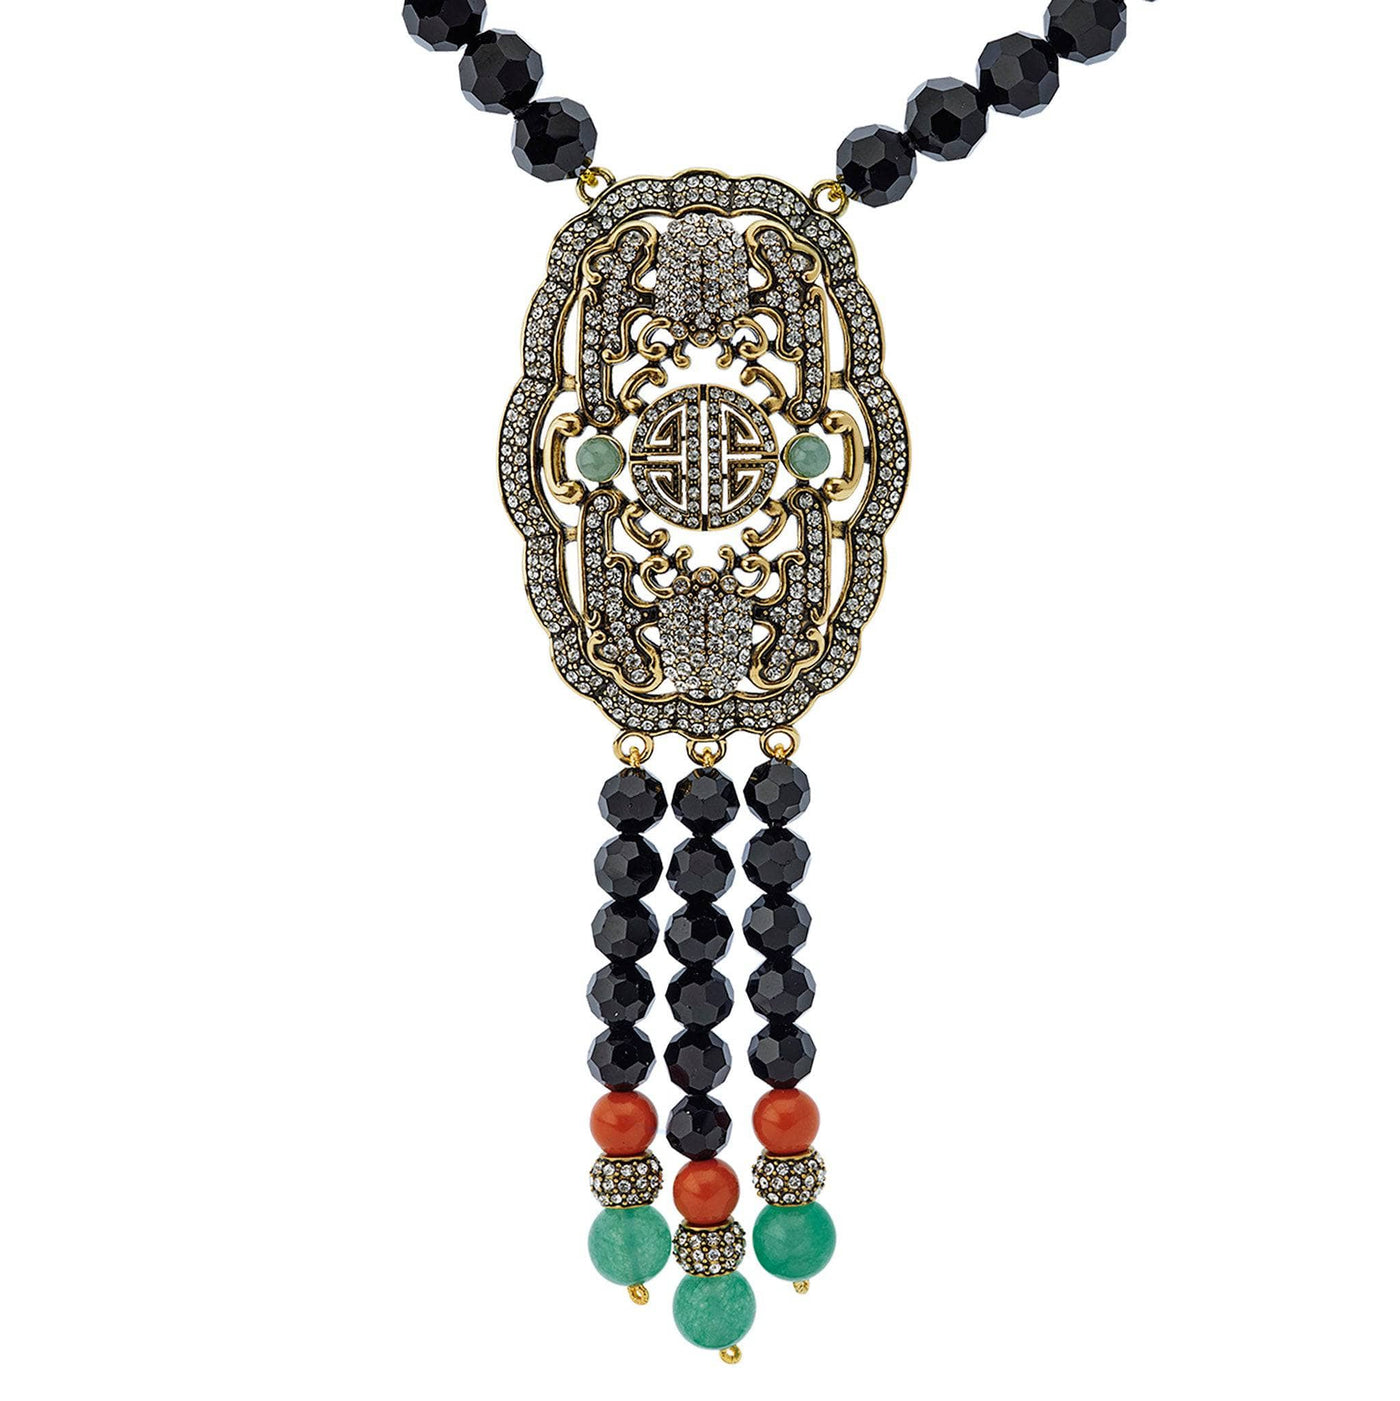 HEIDI DAUS®"Here's to Life" Beaded Crystal Chinoise Necklace